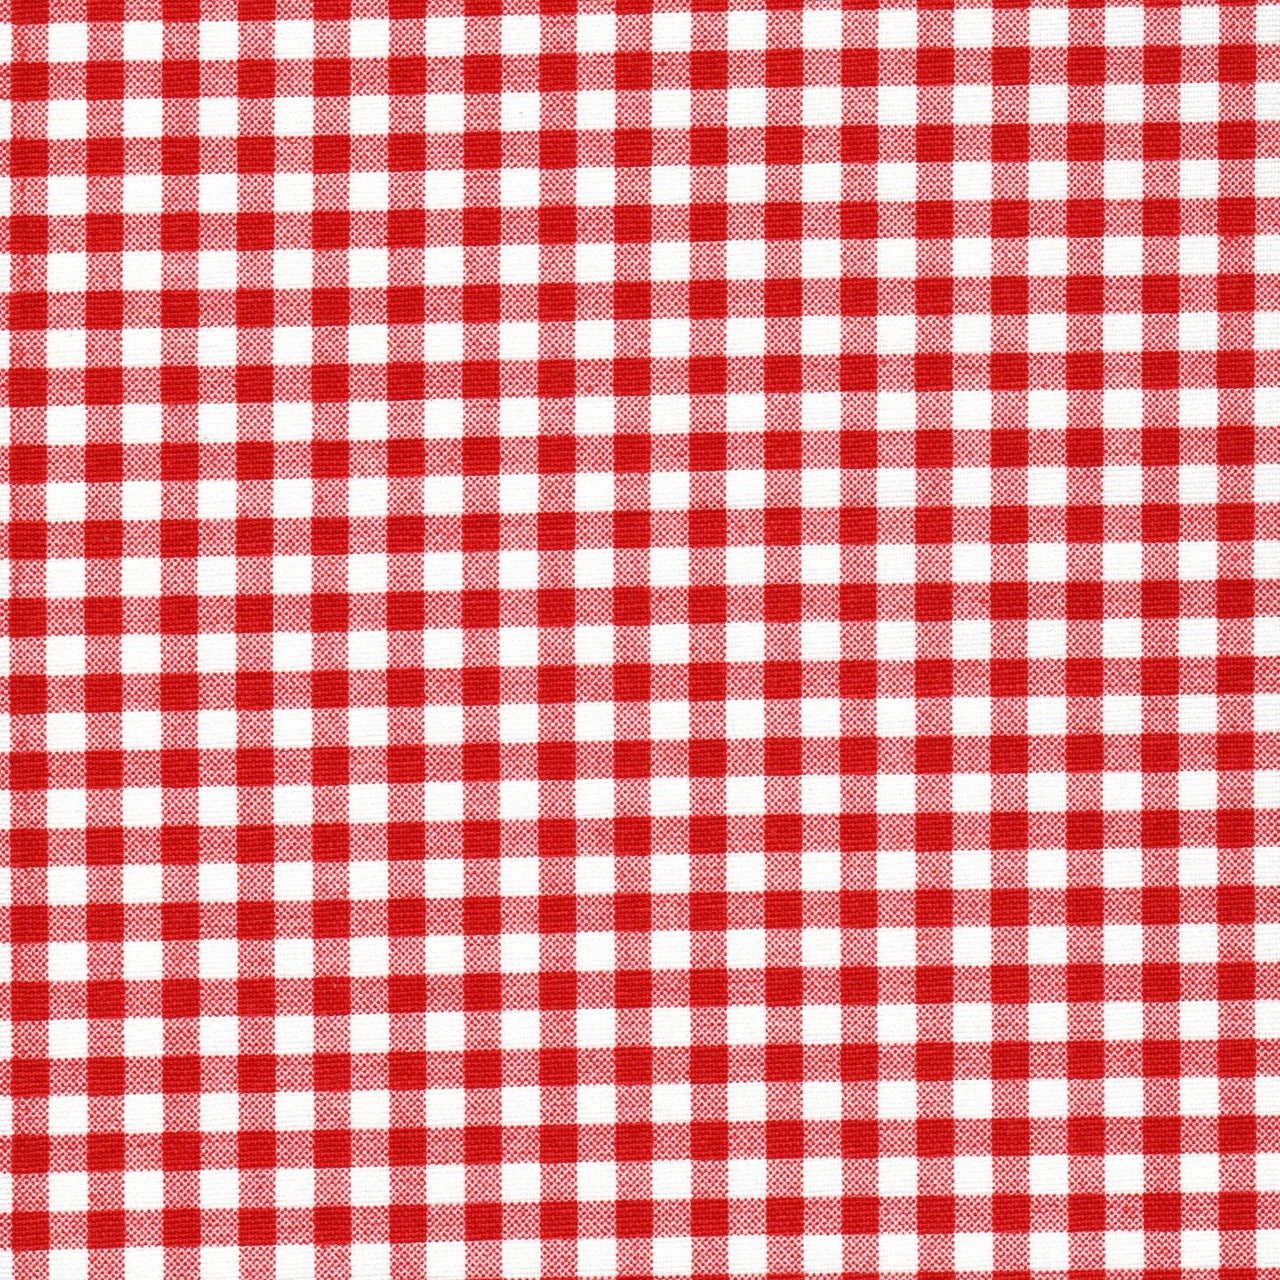 Tailored Valance in Lipstick Red Large Gingham Check on White